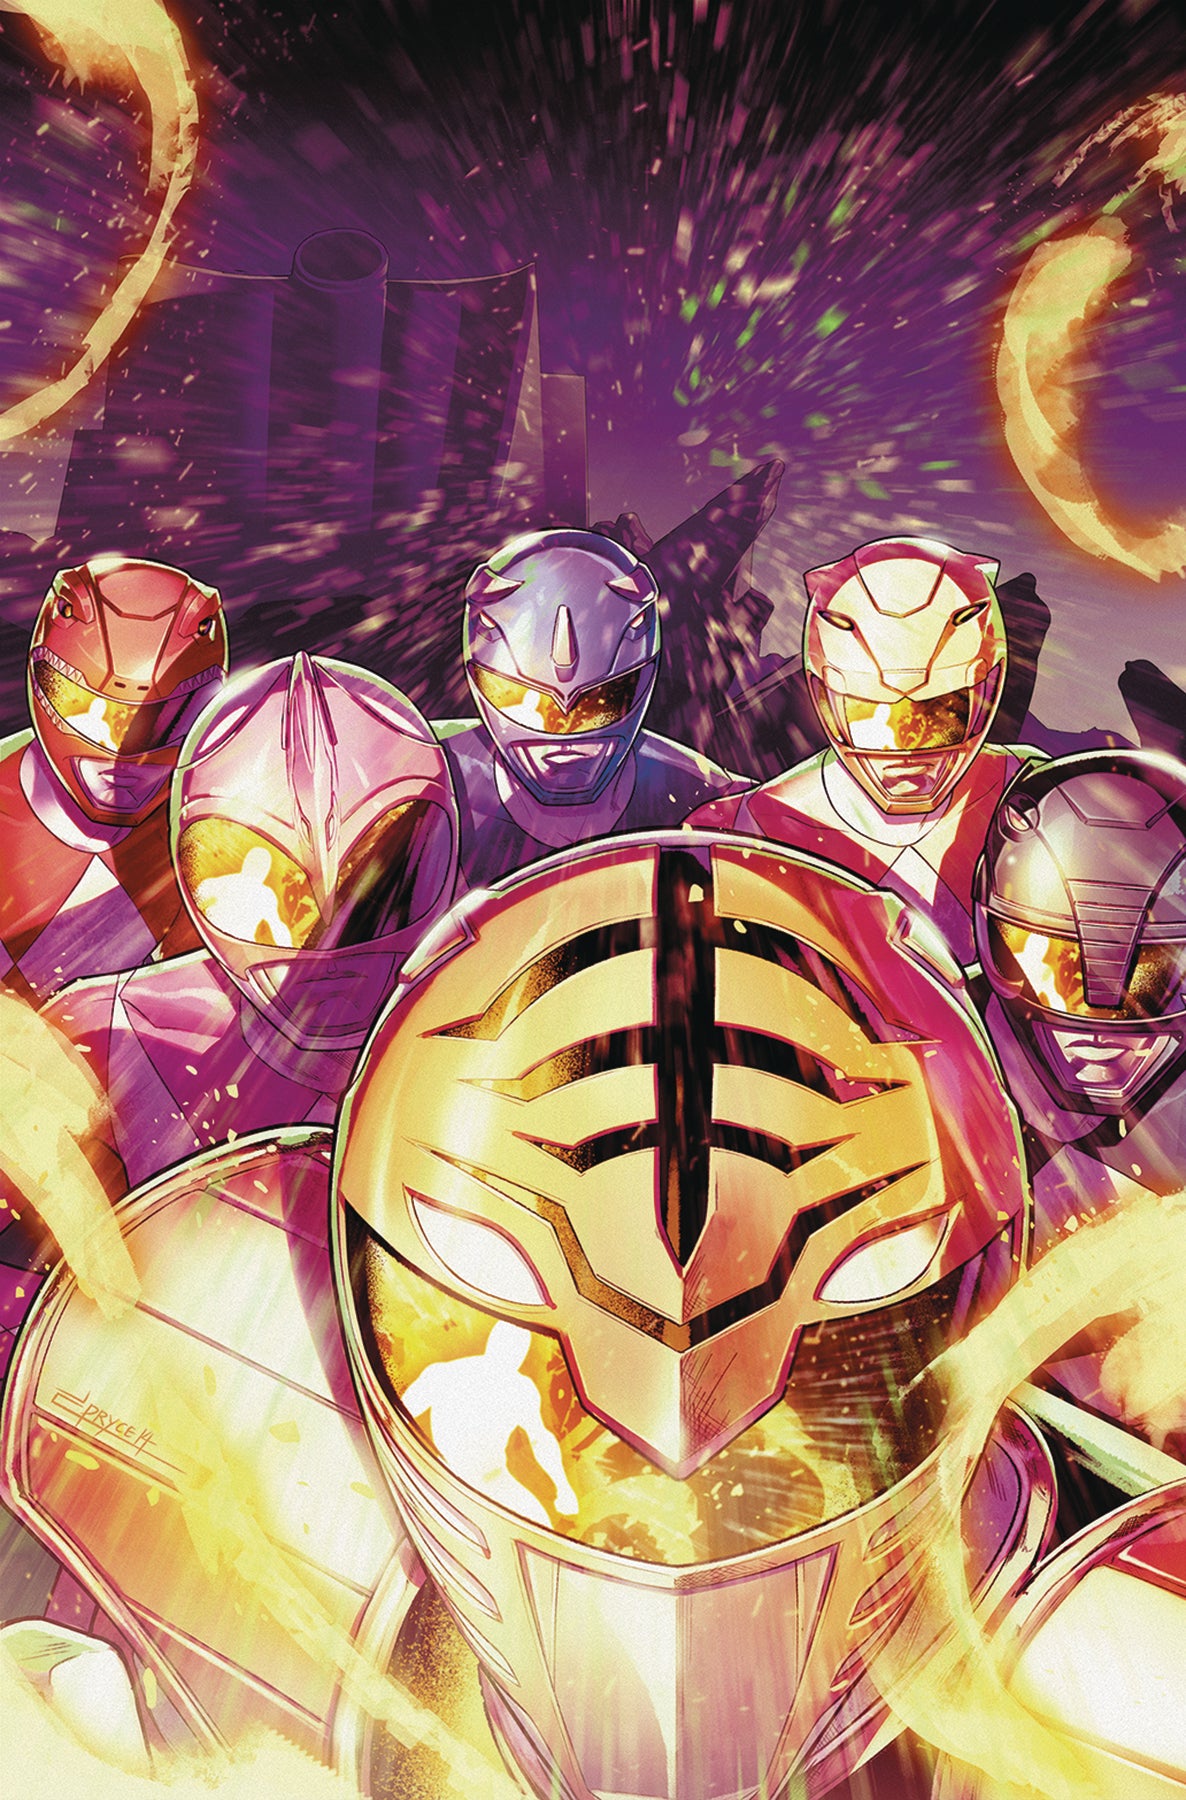 MIGHTY MORPHIN POWER RANGERS #51 CVR A CAMPBELL | Game Master's Emporium (The New GME)